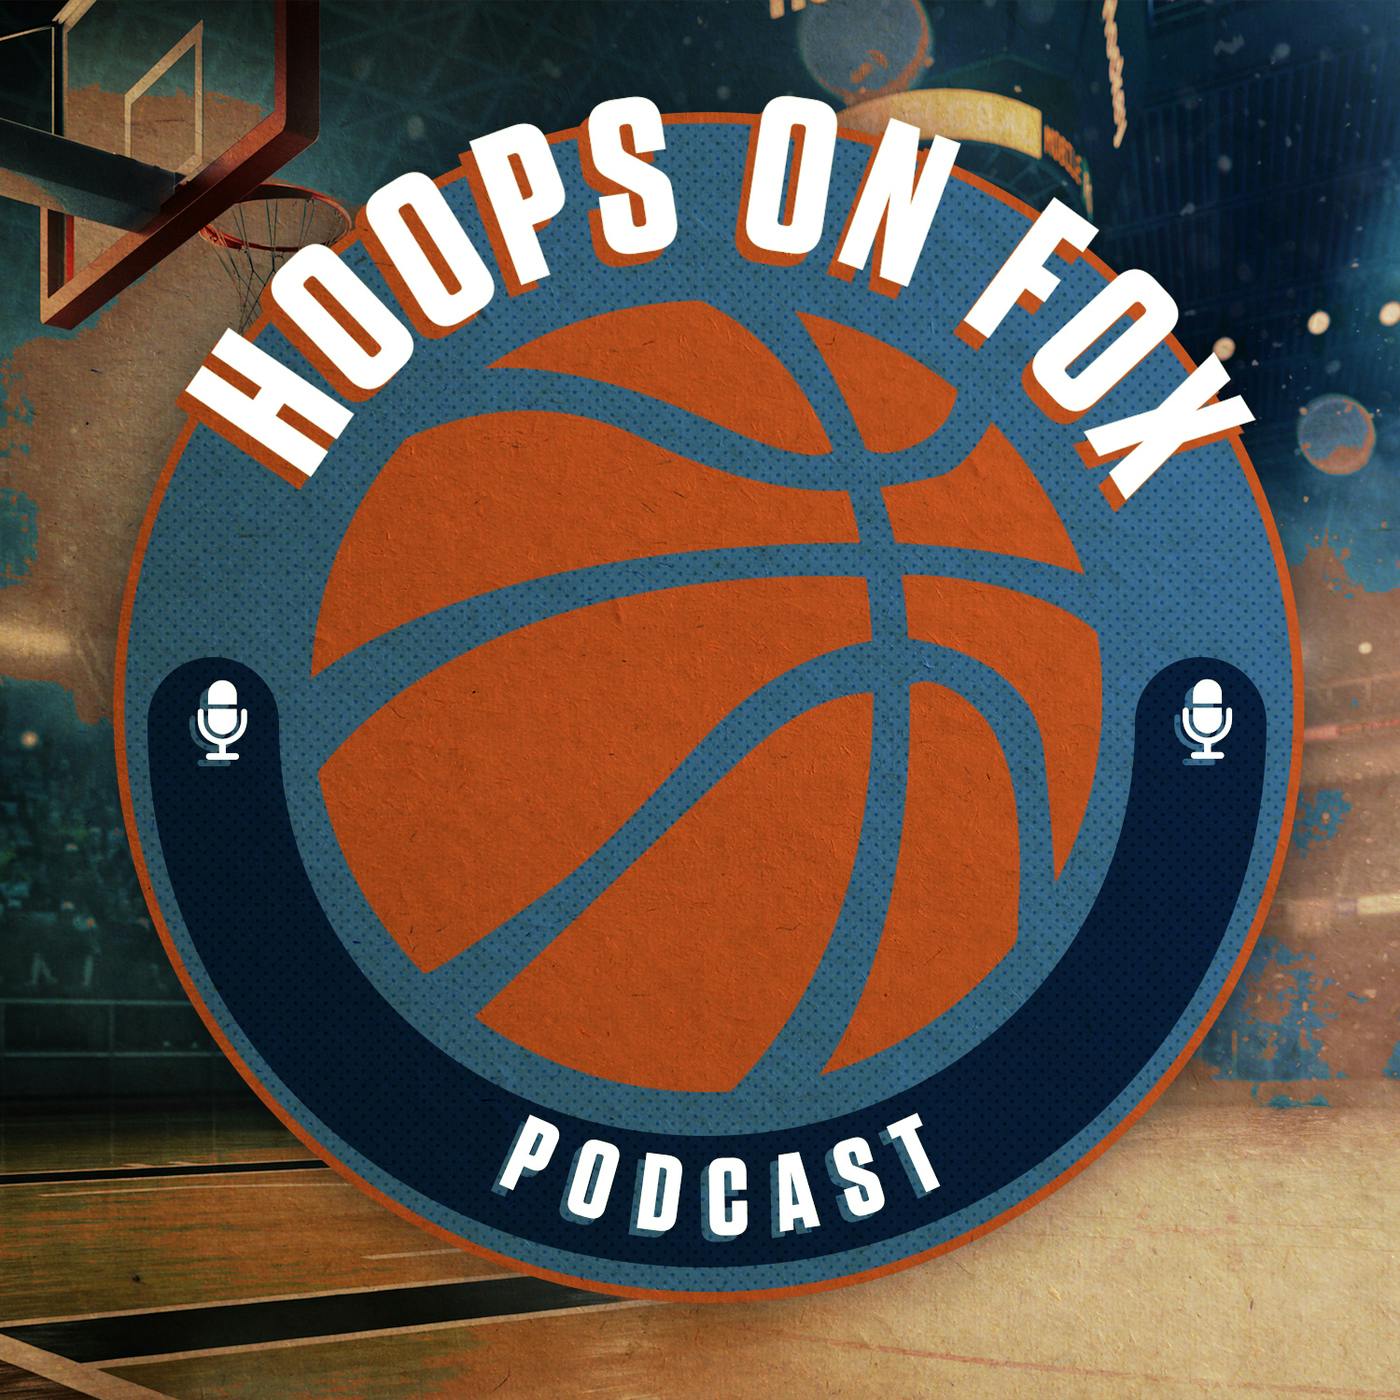 Ep.4 - 2/1/17 - Bring Back the Old Steph Curry & Michael Rapaport Talks Knicks